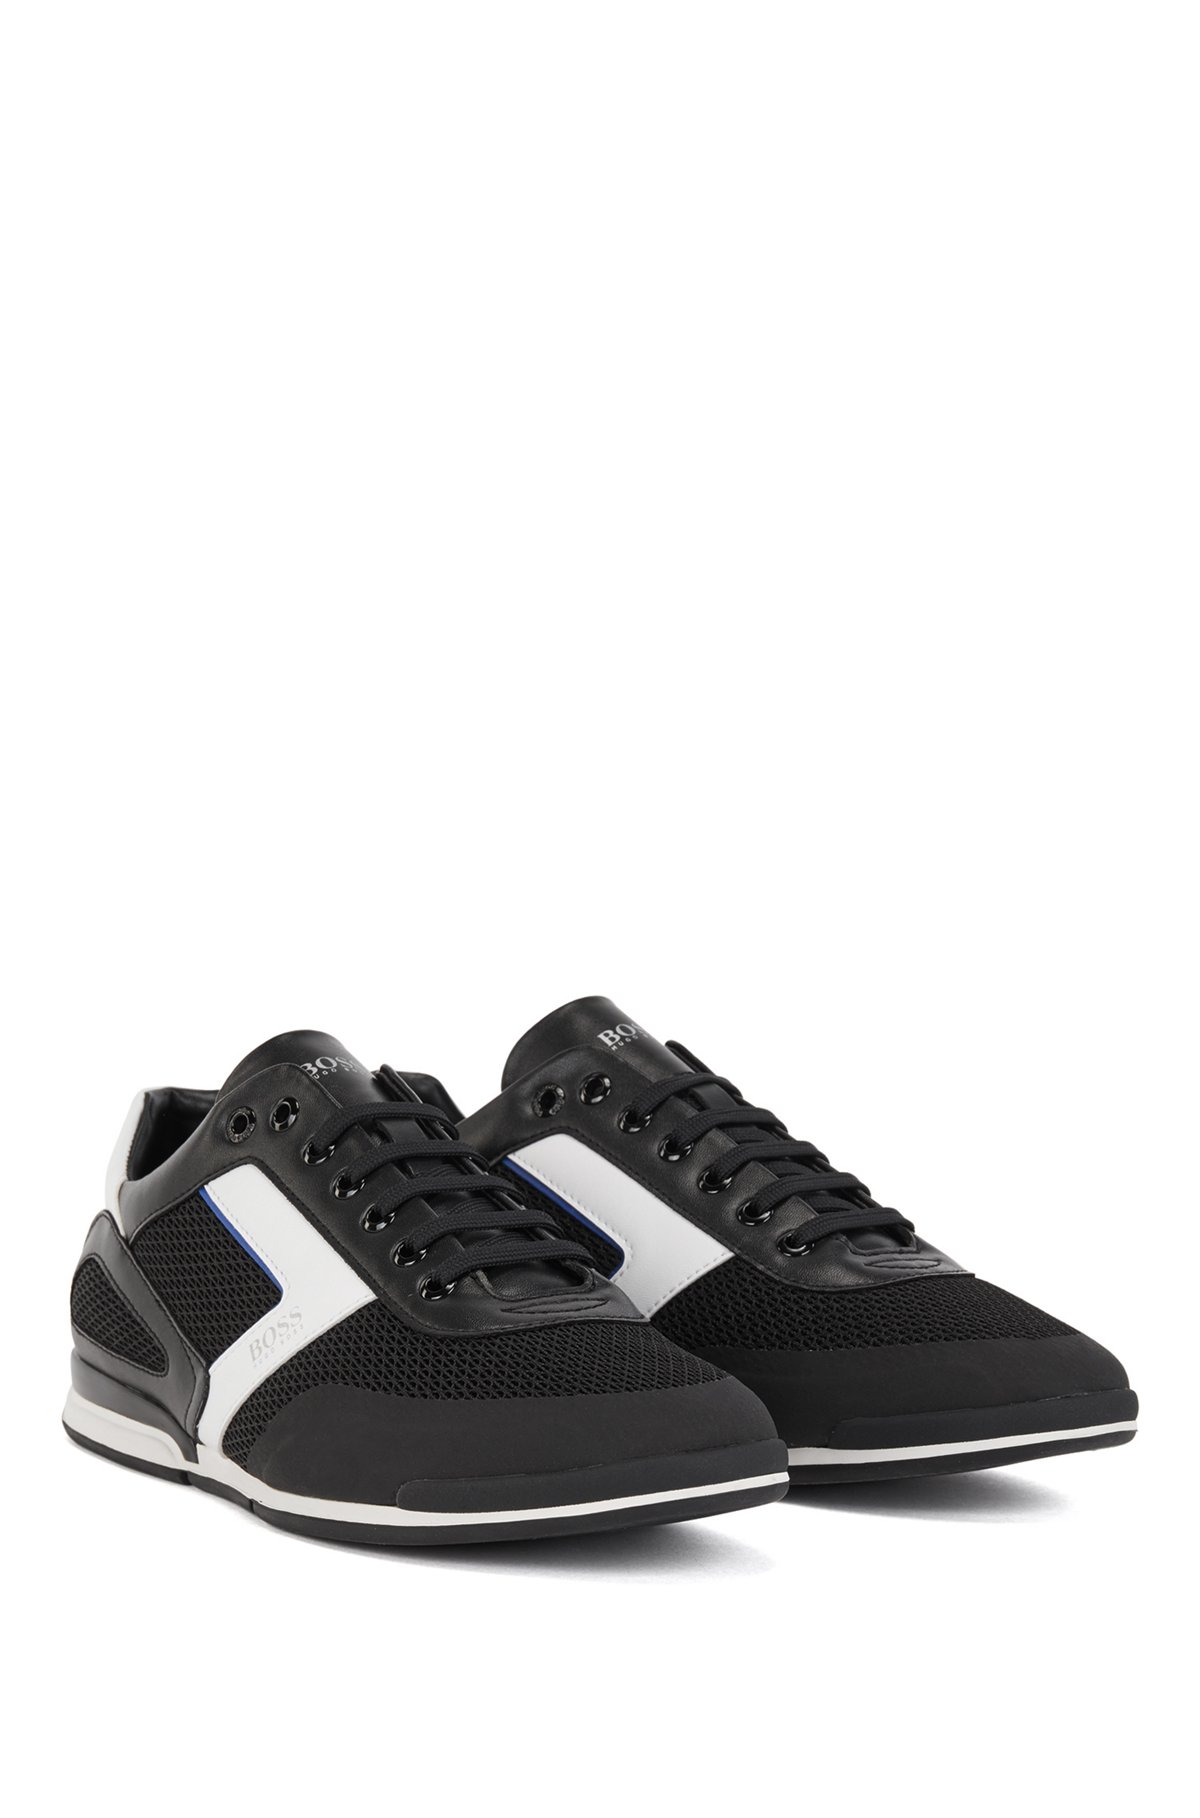 Hybrid trainers with reflective details and backtab logo, Black